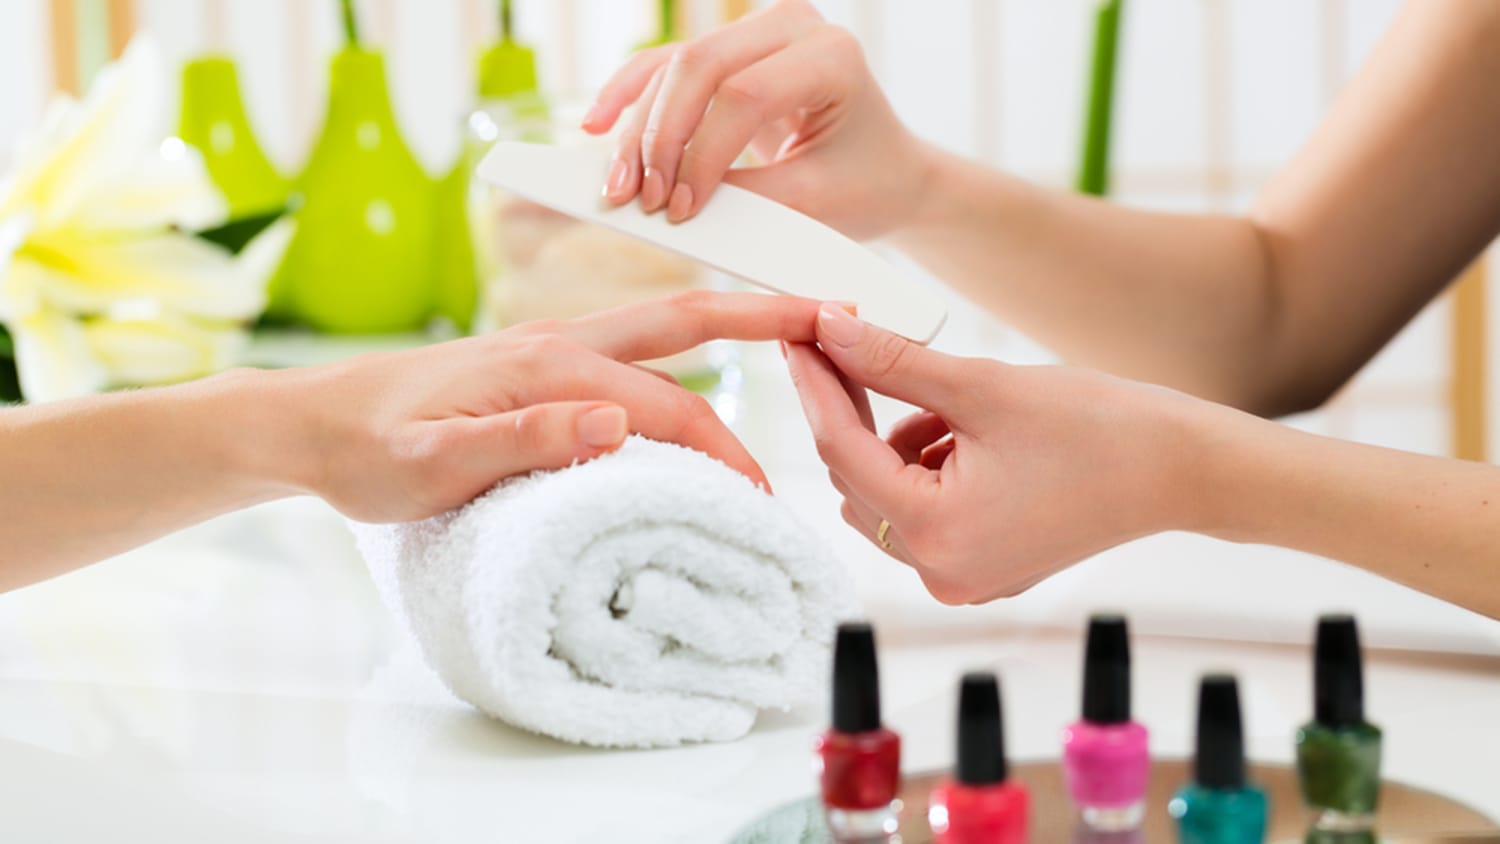 Nail salon etiquette: How much should you tip?